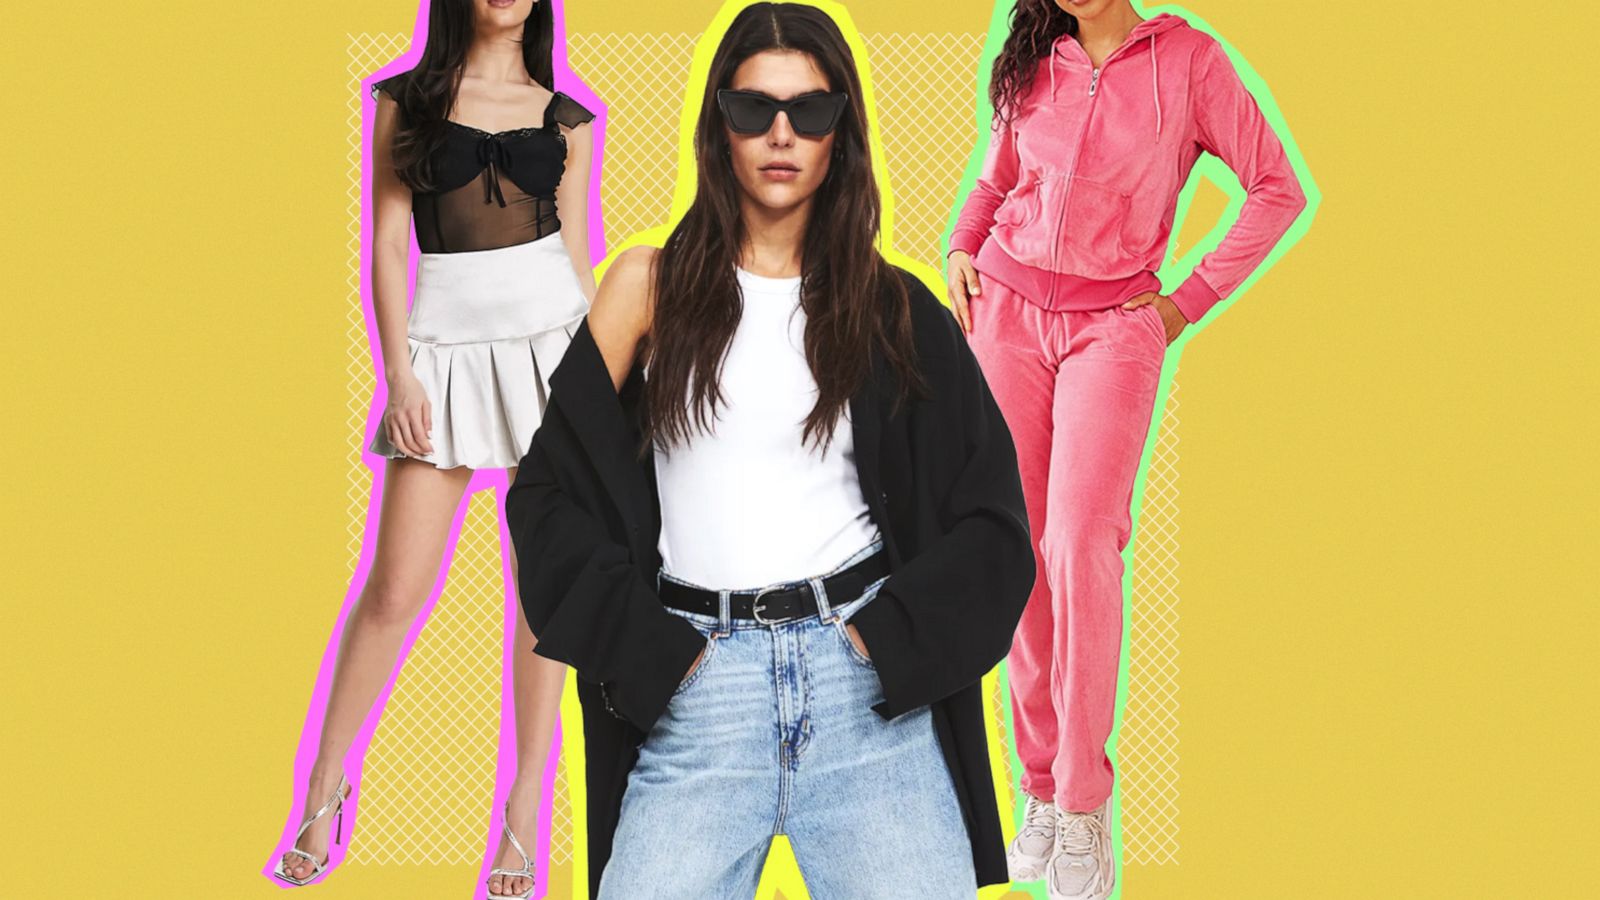 28 Iconic Fashion Trends From The Early 2000s  2000s fashion trends, 2000s fashion  outfits, Early 2000s fashion